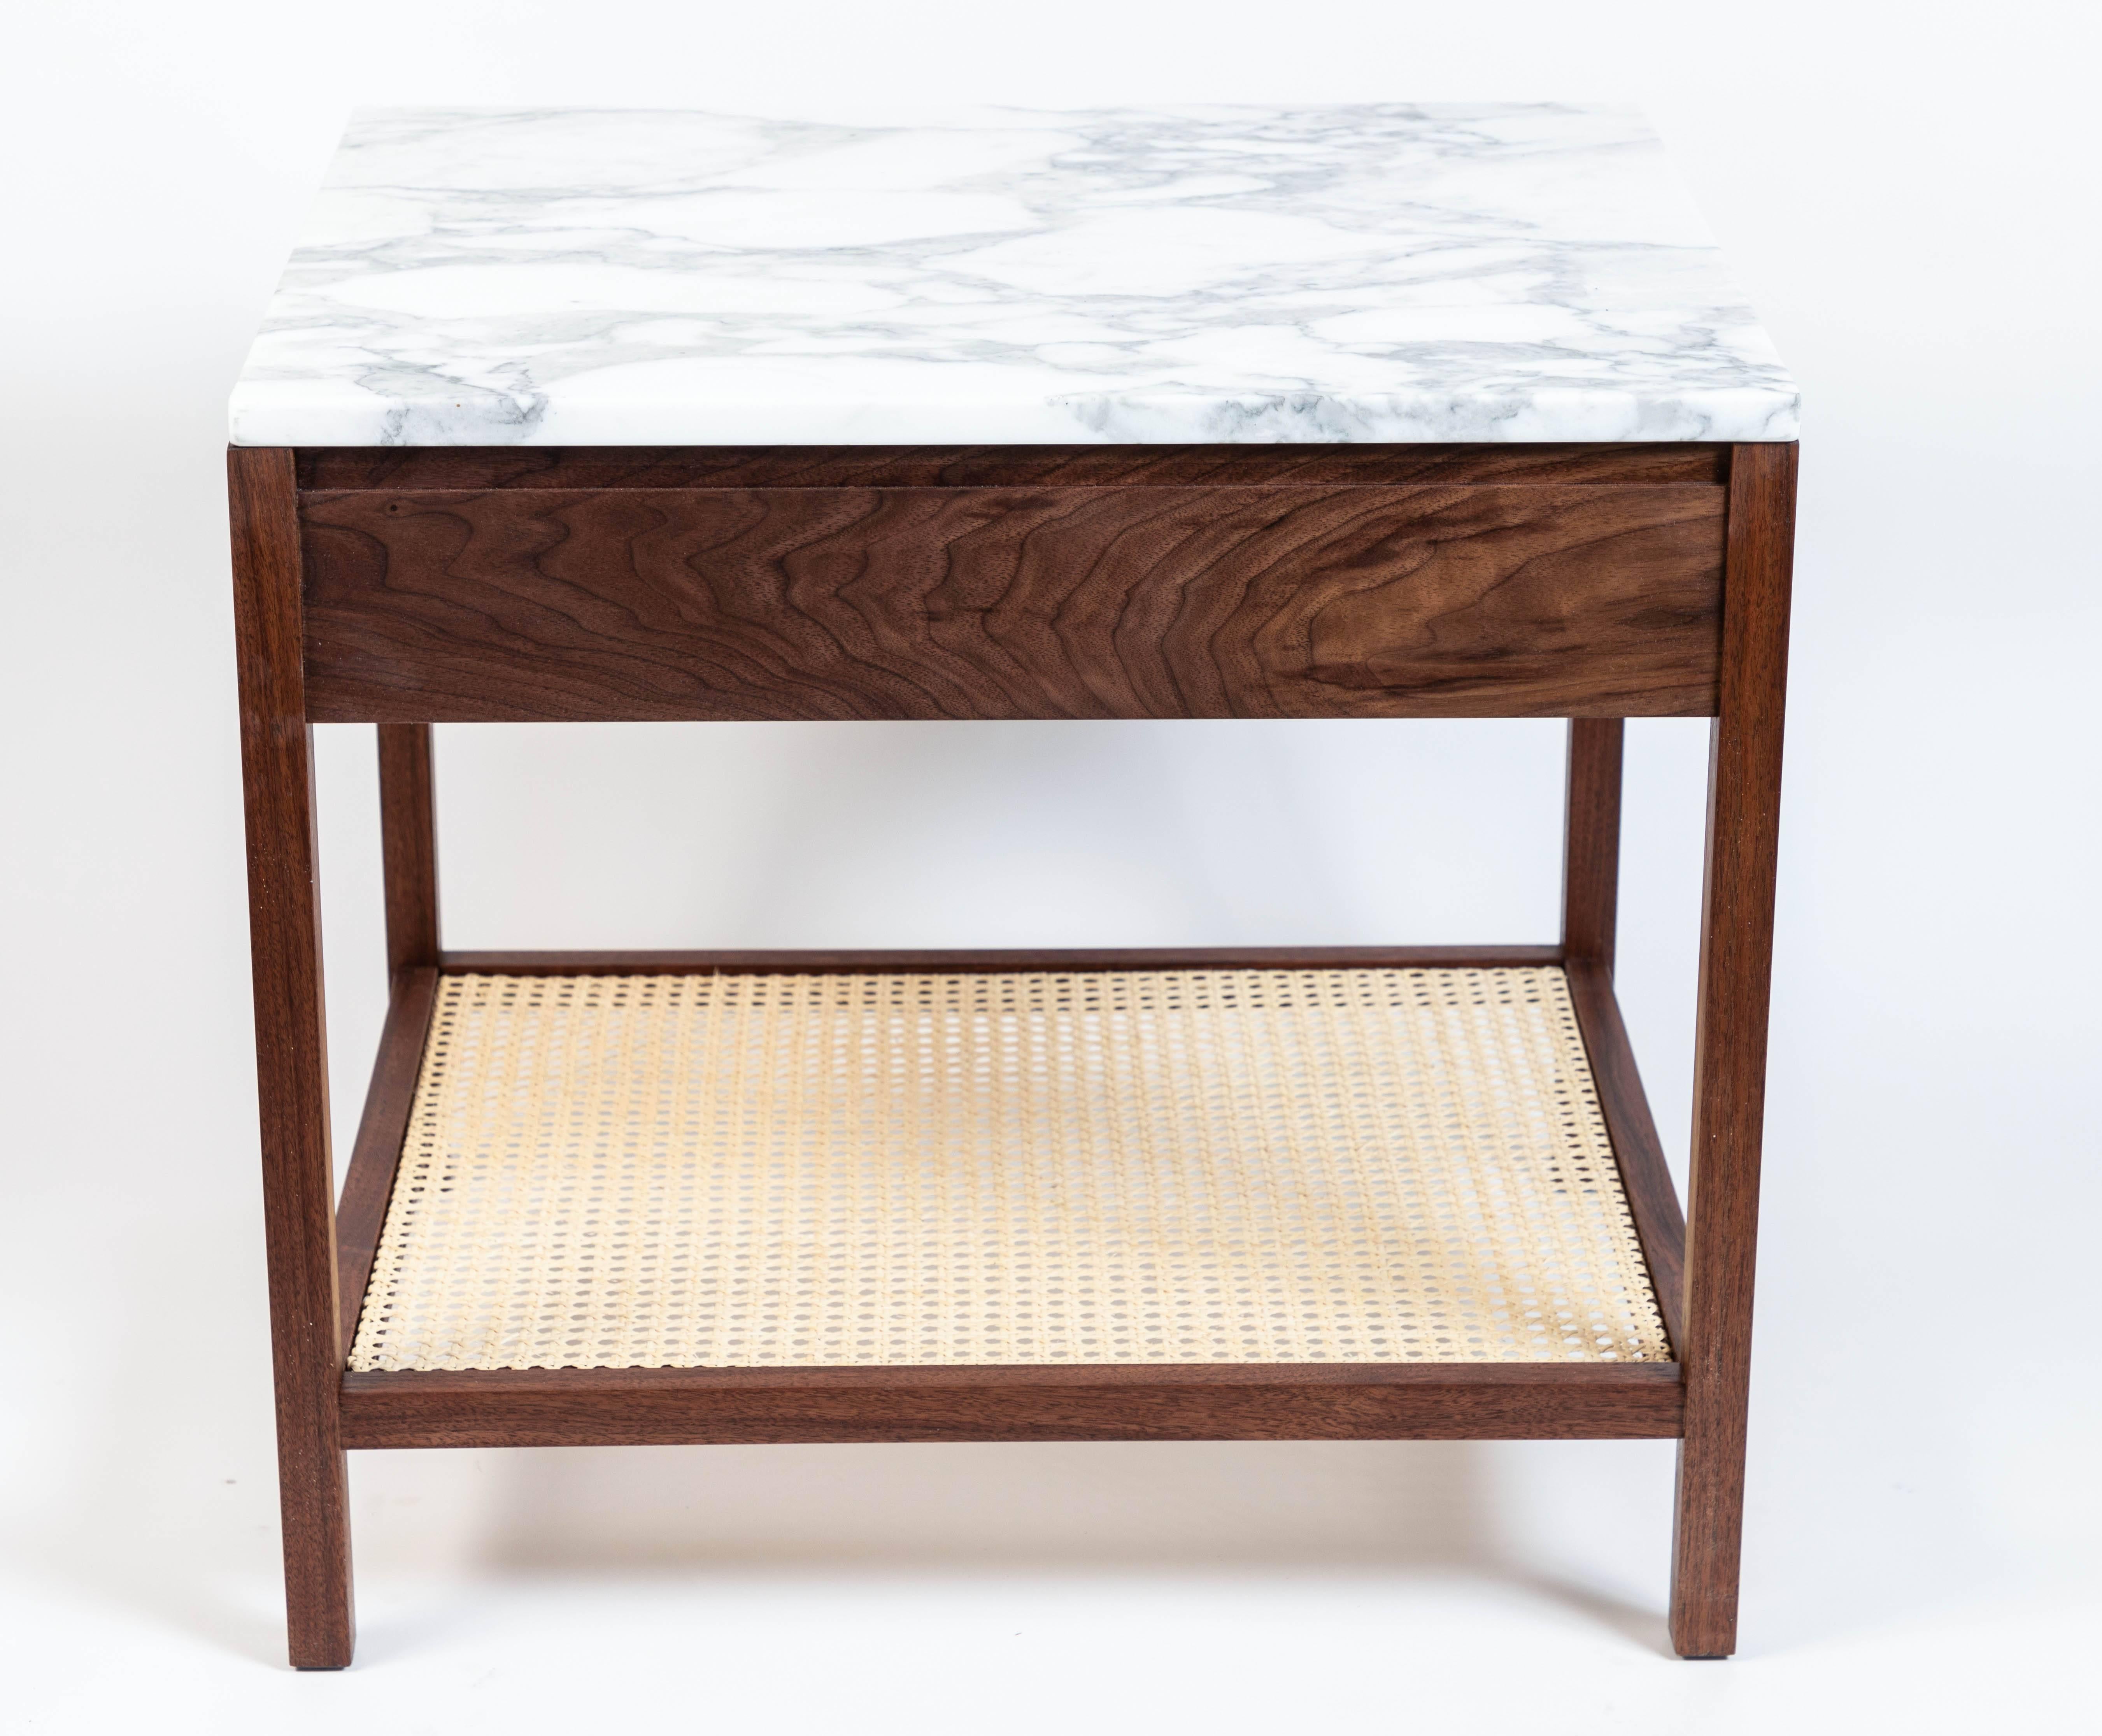 Custom-Made Walnut End Table with a Marble Top and Caned Bottom Shelf  1